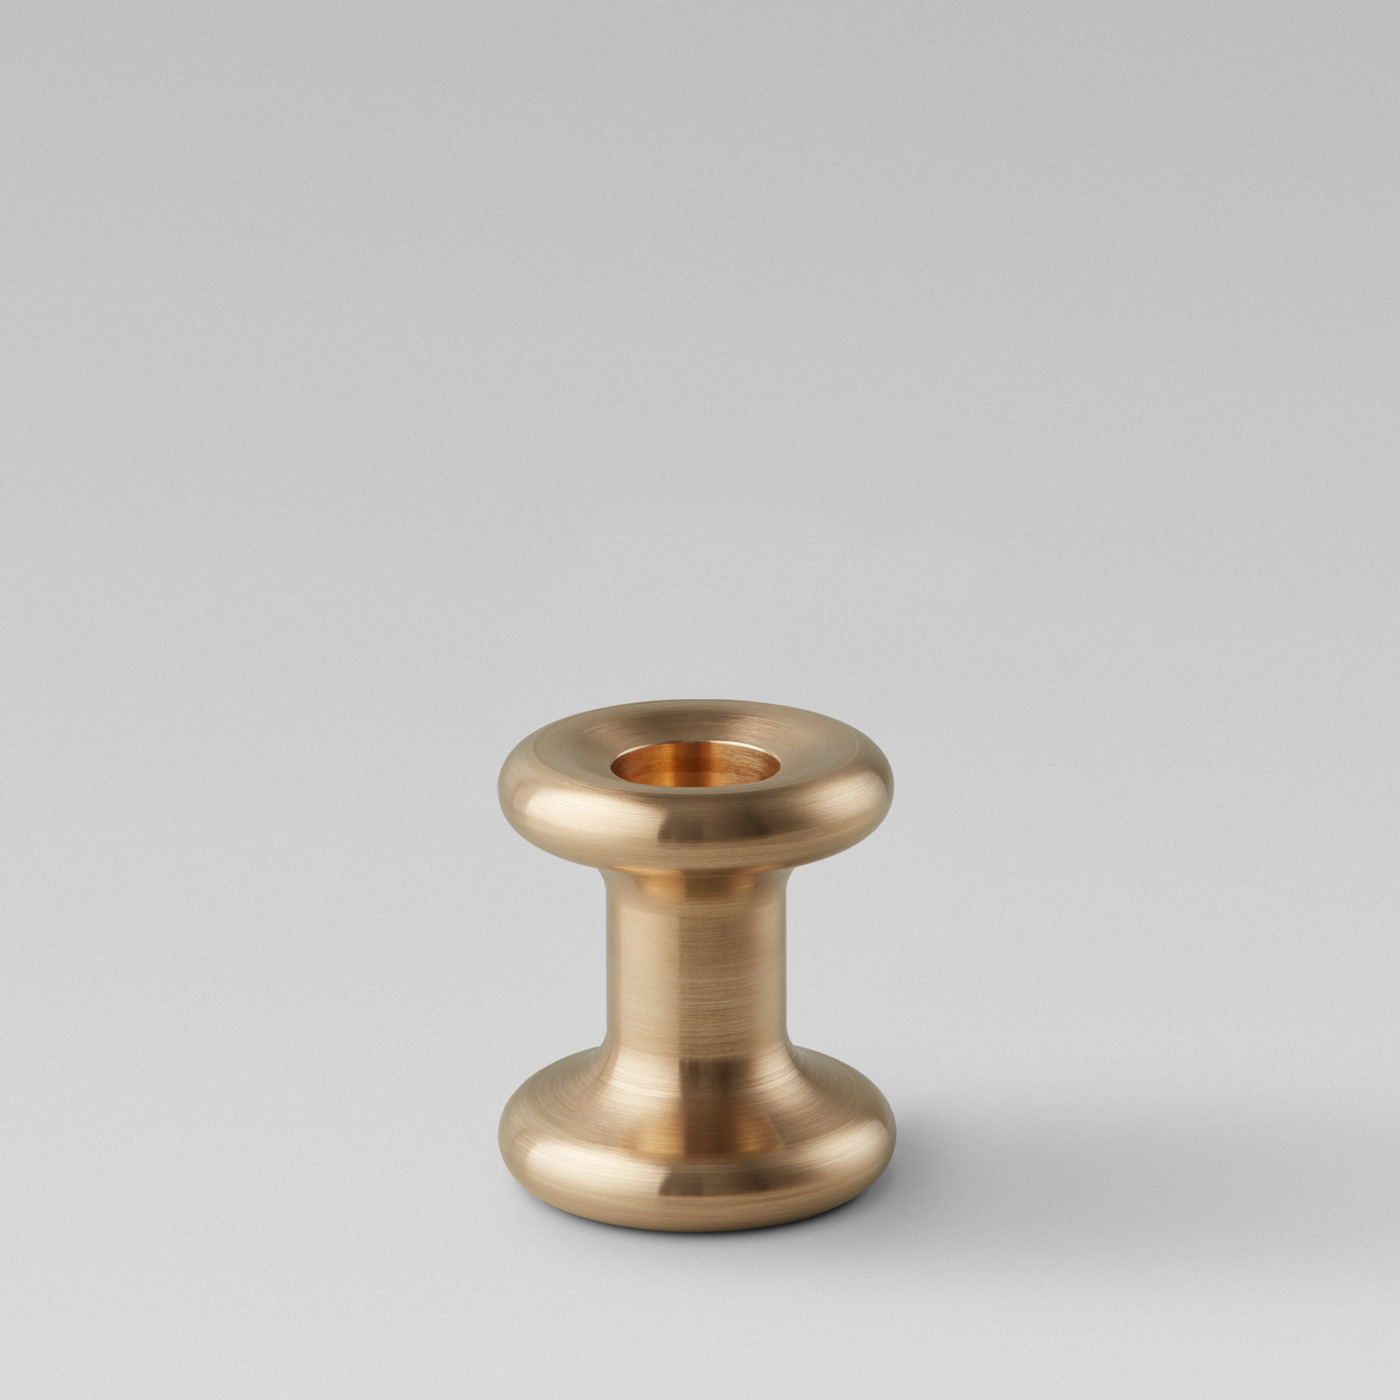 Lucie Candle Holder Short in solid brass without a candle.